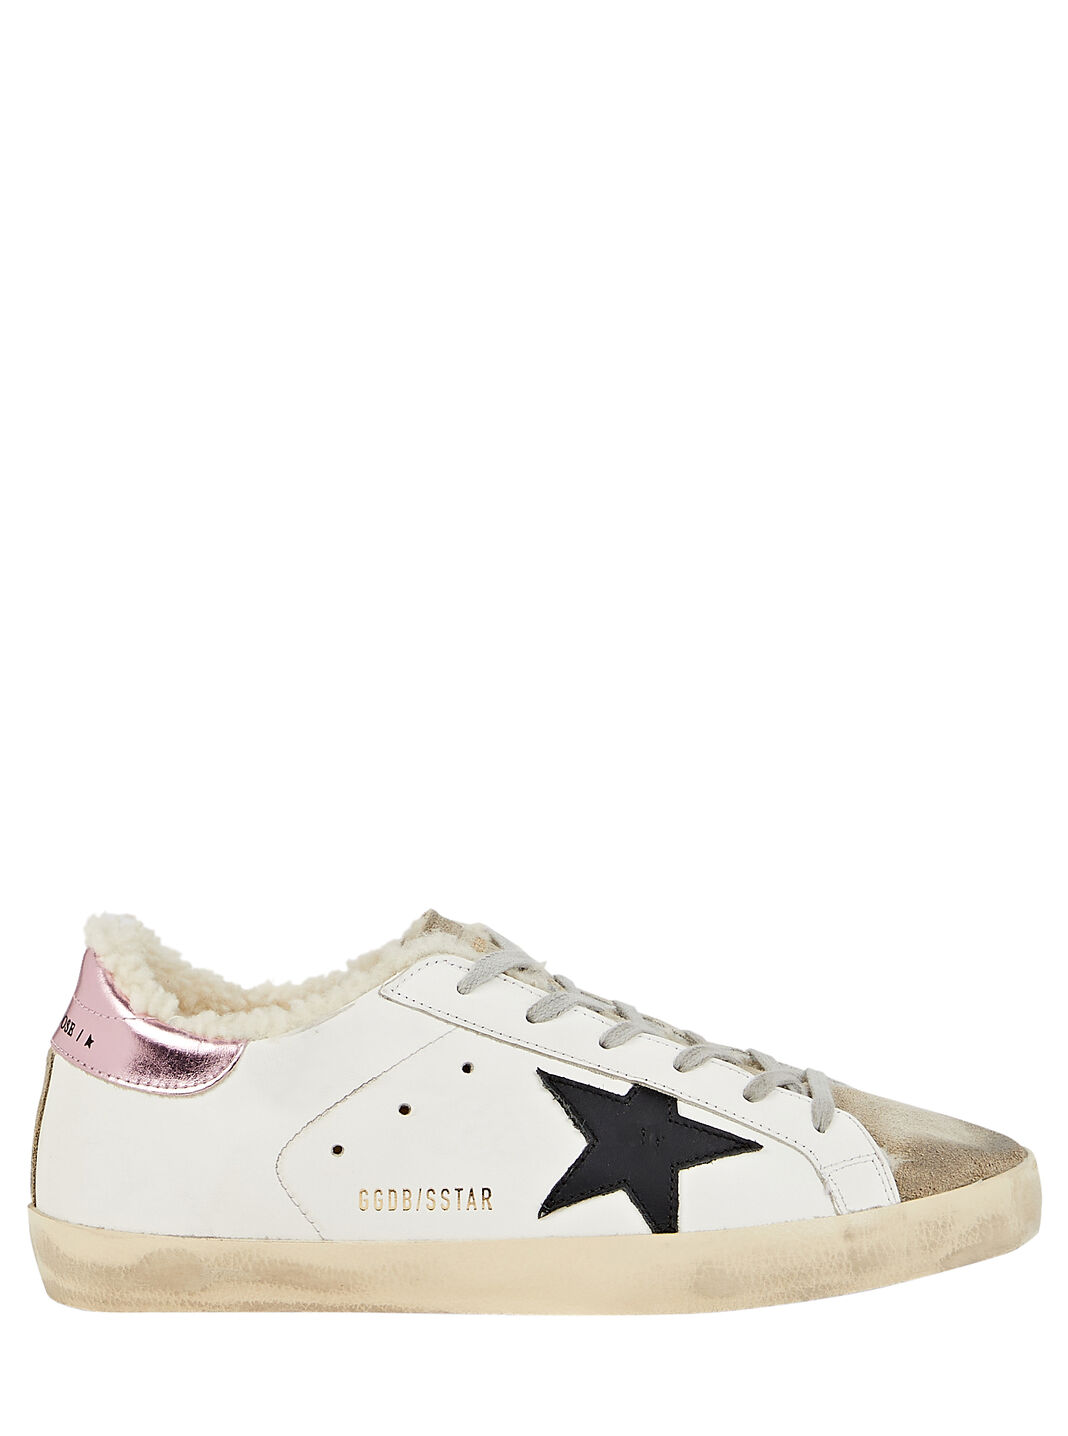 Superstar Shearling-Lined Low-Top Sneakers